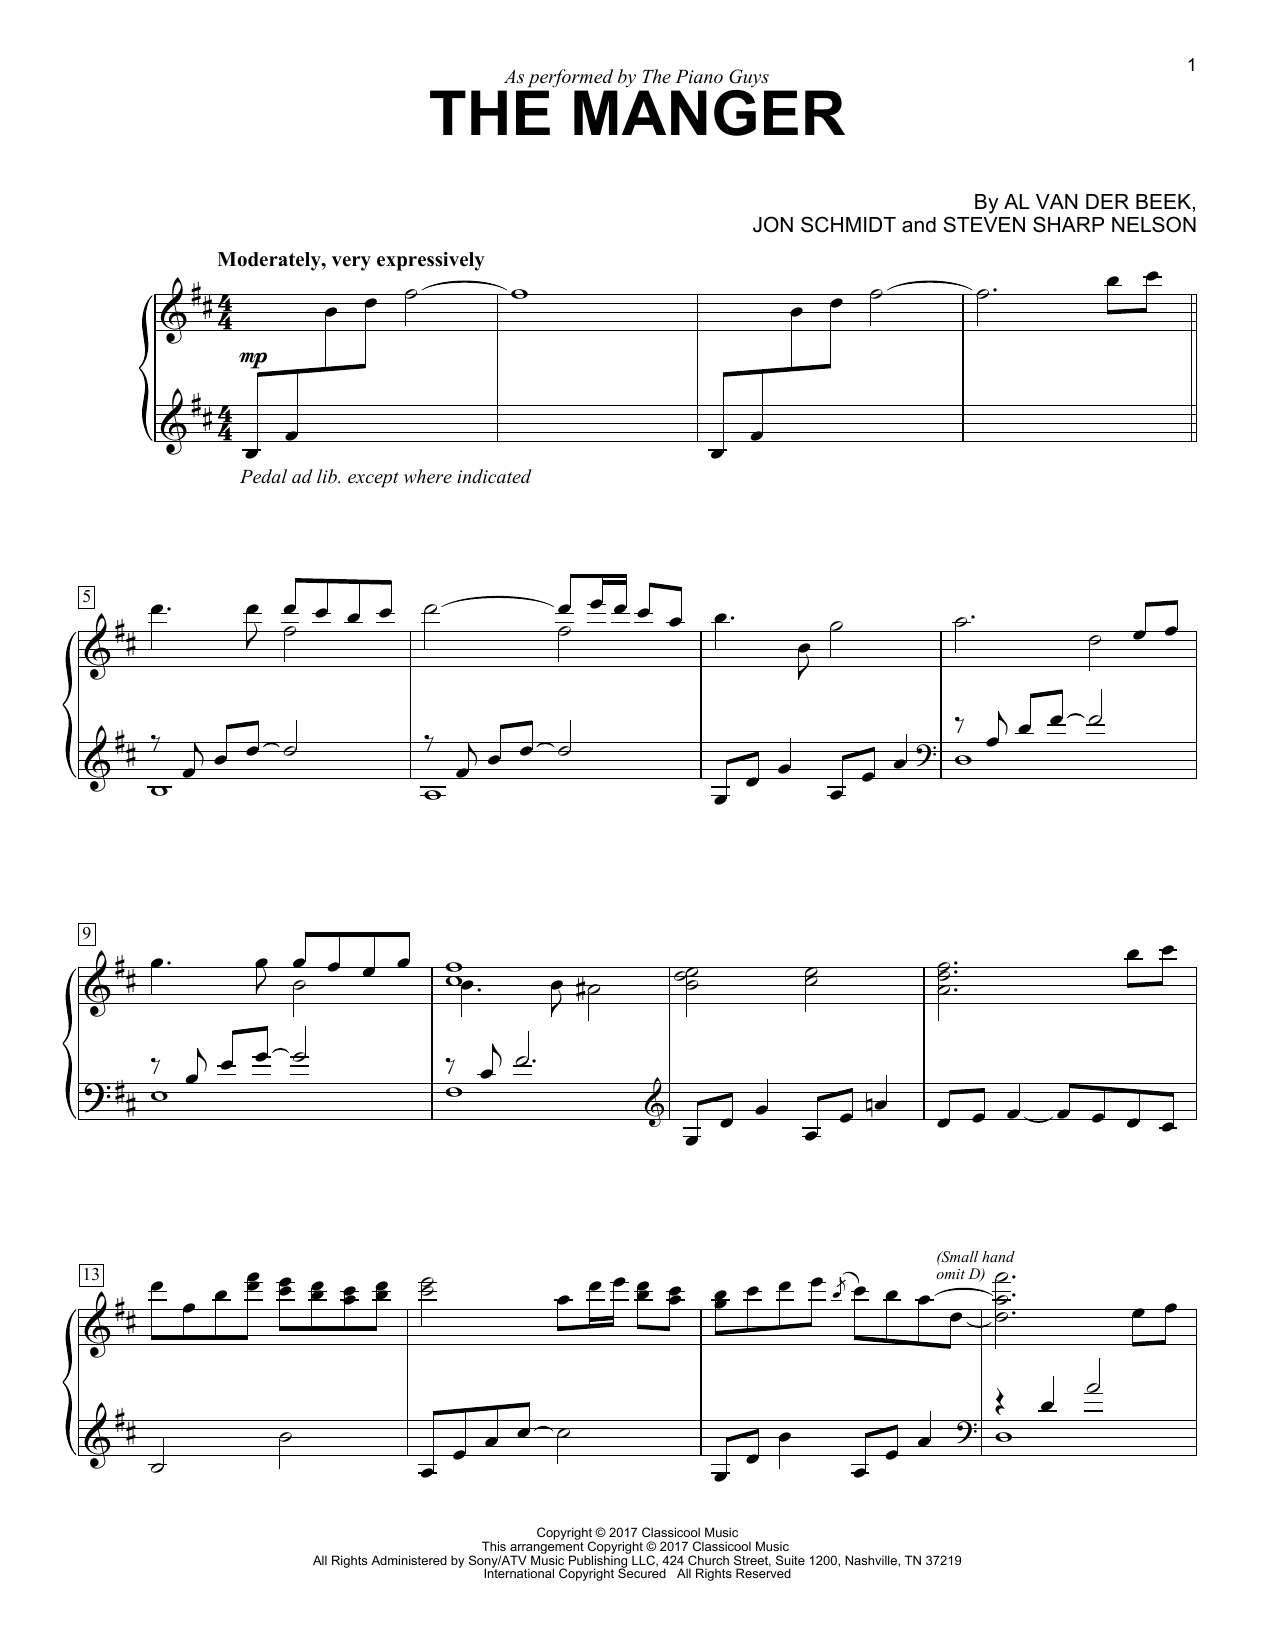 Download The Piano Guys The Manger Sheet Music